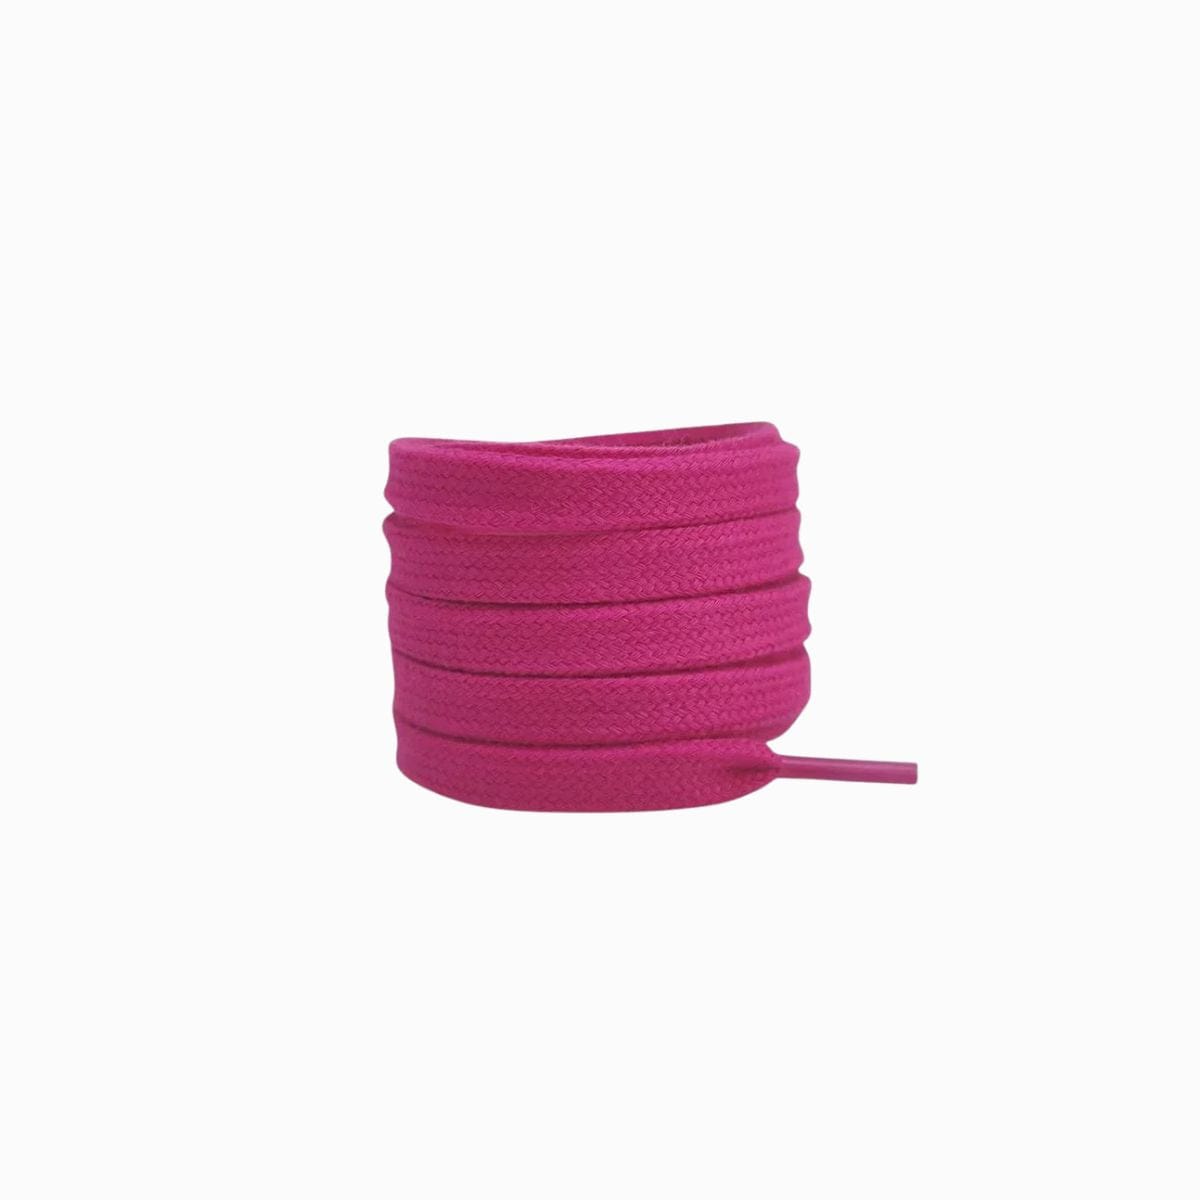 Rose Pink Replacement Adidas Shoe Laces for Adidas Samba OG Sneakers by Kicks Shoelaces